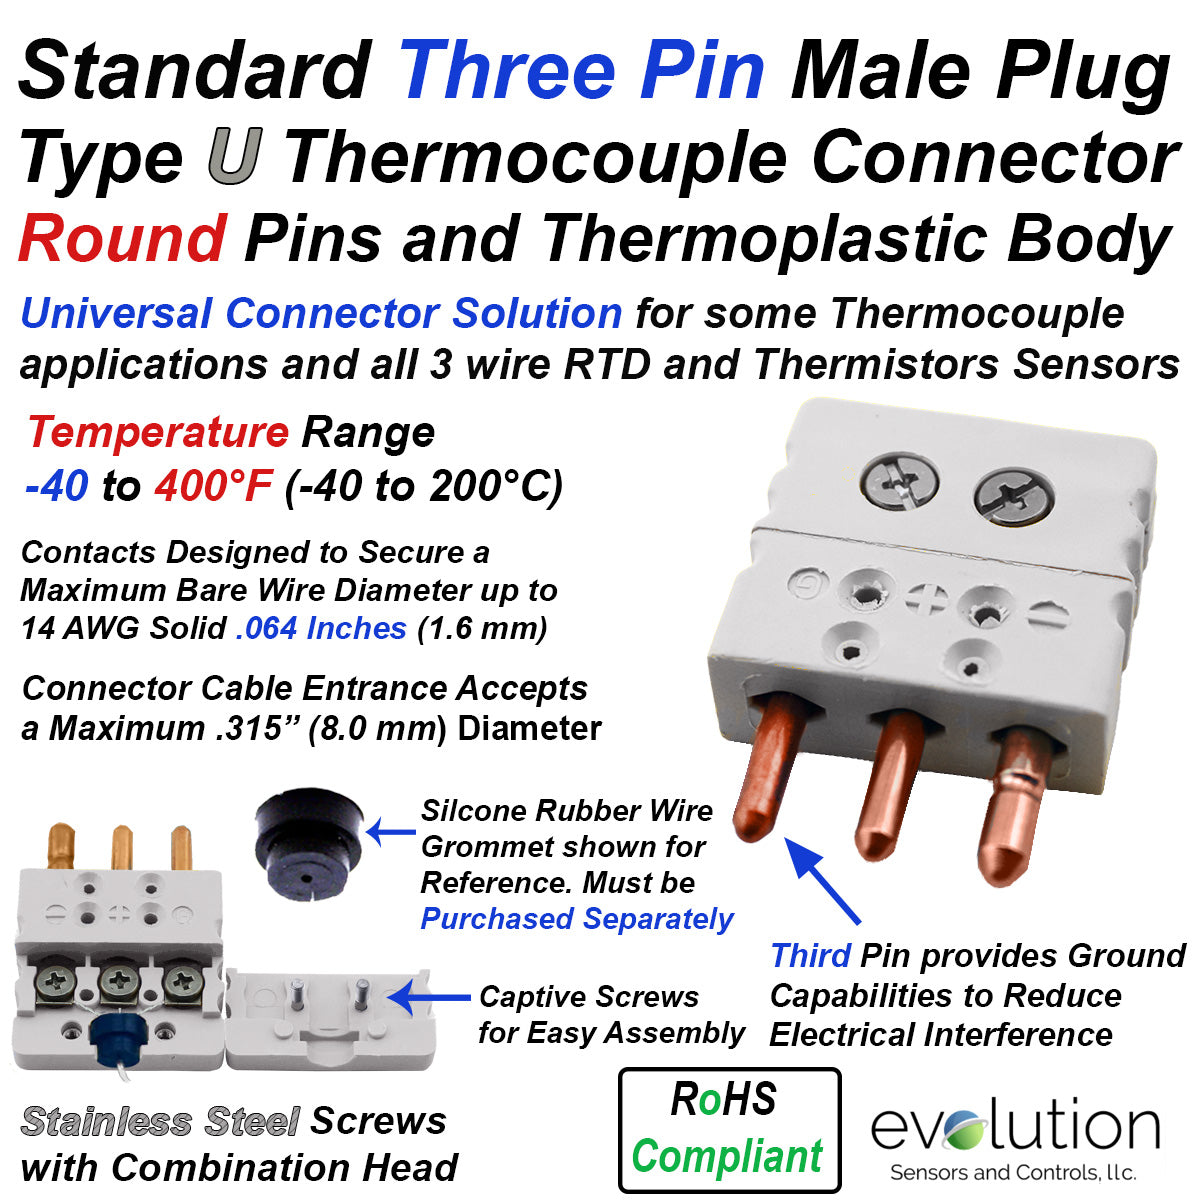 Therma 22 Dual Sensor Meter (Type T Thermocouple and Thermistor)